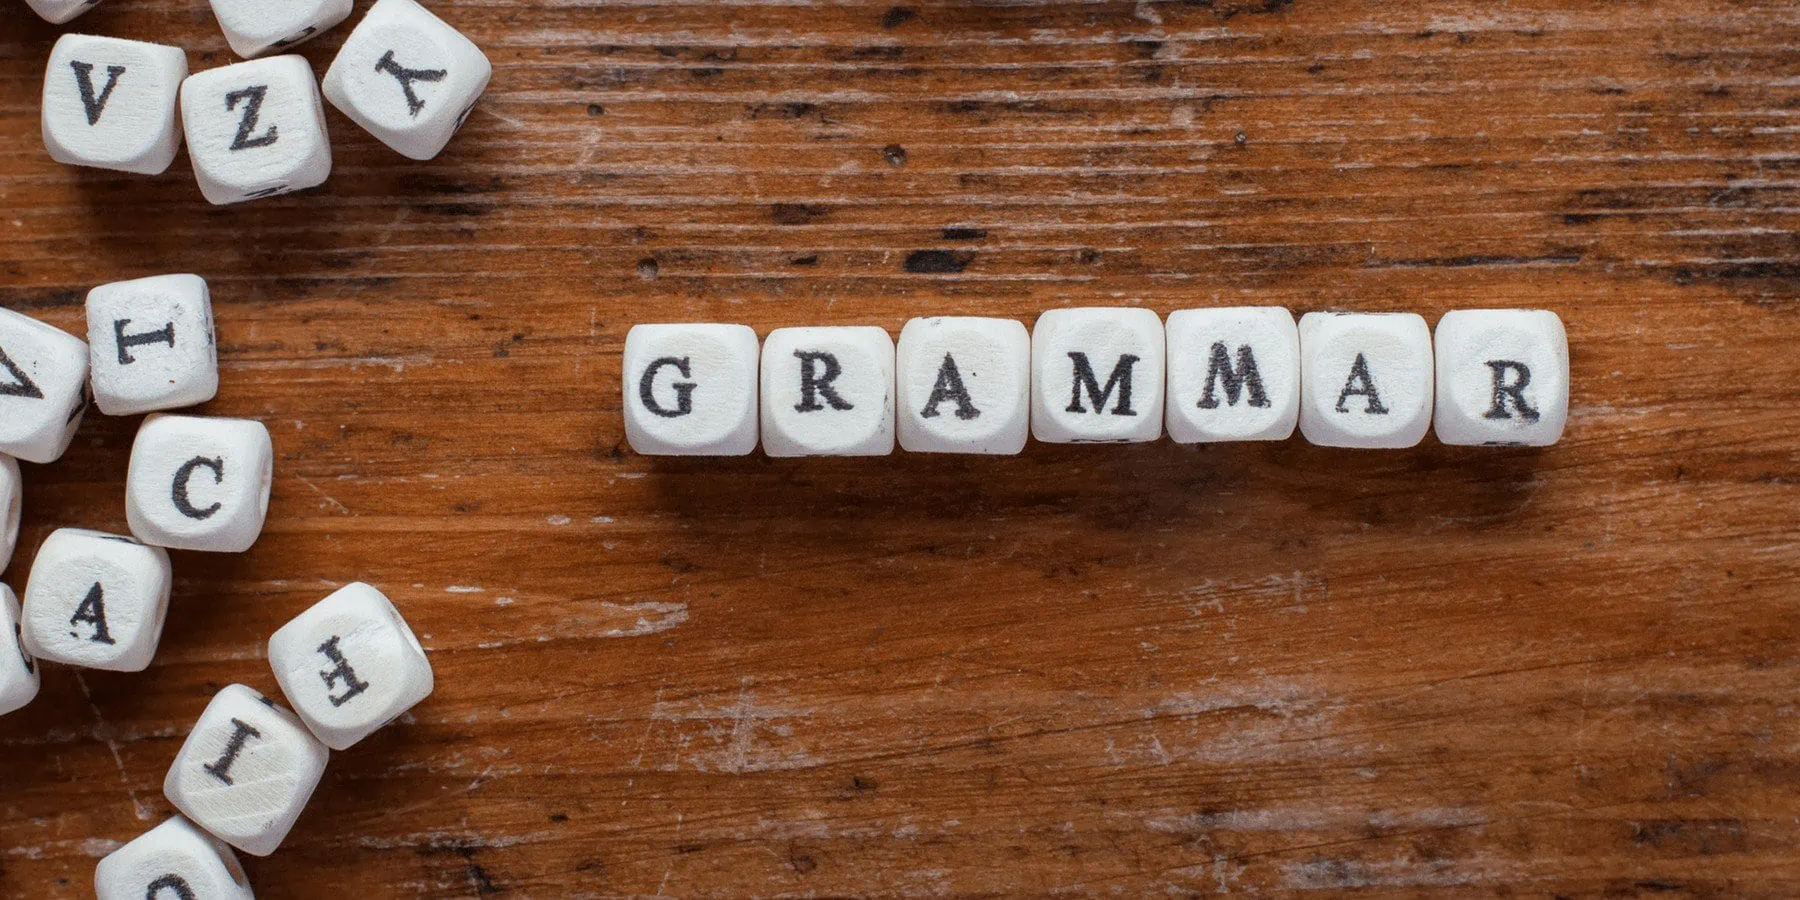 Grammar vs. Comprehensible Input: Who’s Right?